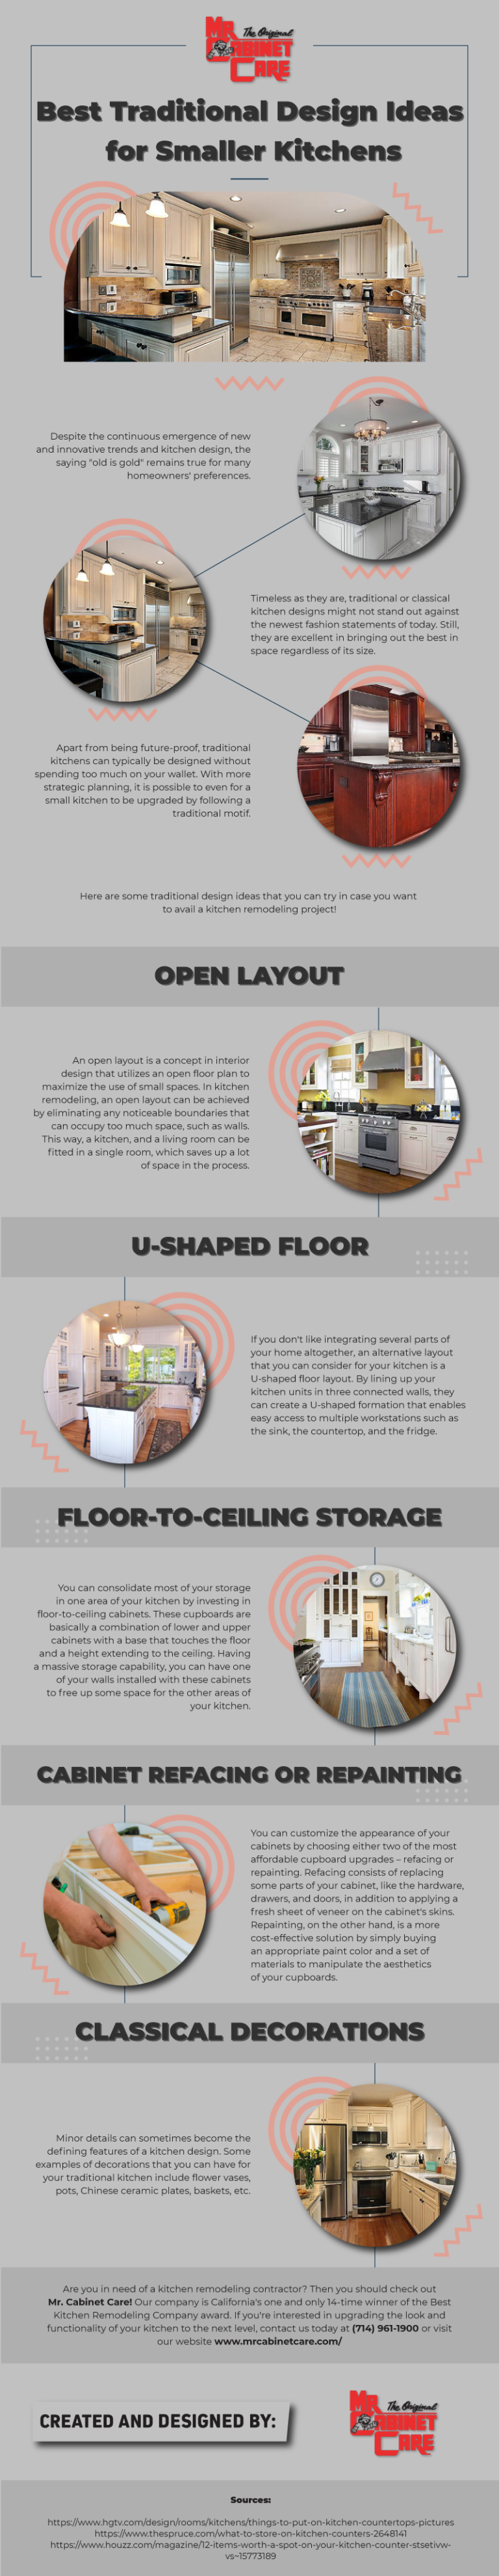 small kitchen ideas - infographic